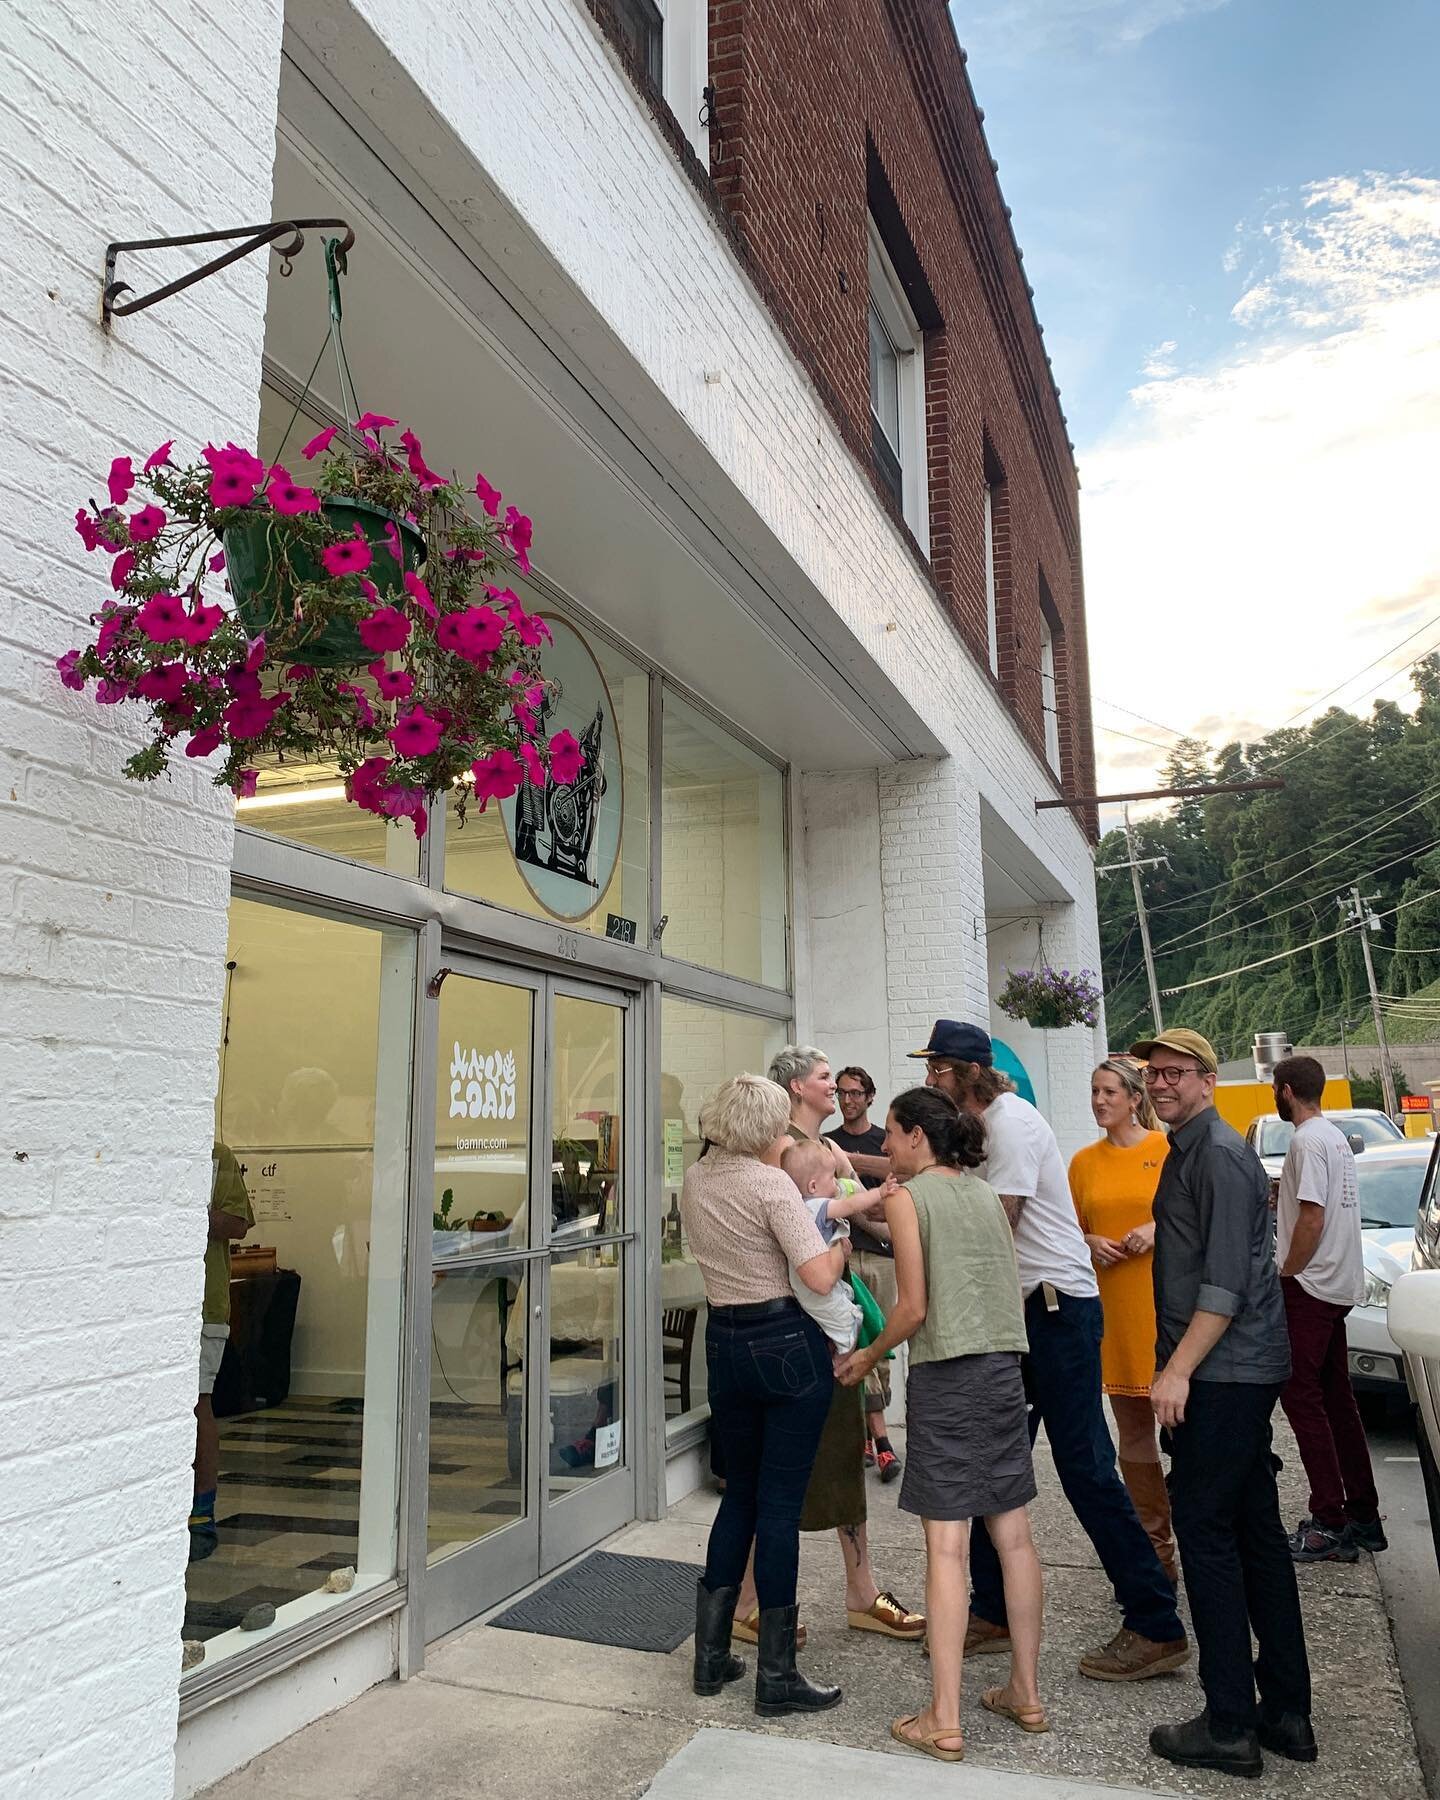 Thank you to everyone who came out to our Open House event last night!! What a vibrant night celebrating our talented Treats fam and Spruce Pine community!  Special thanks to @wickedgoodpretzels for some seriously tasty treats !! 🥨&hearts;️